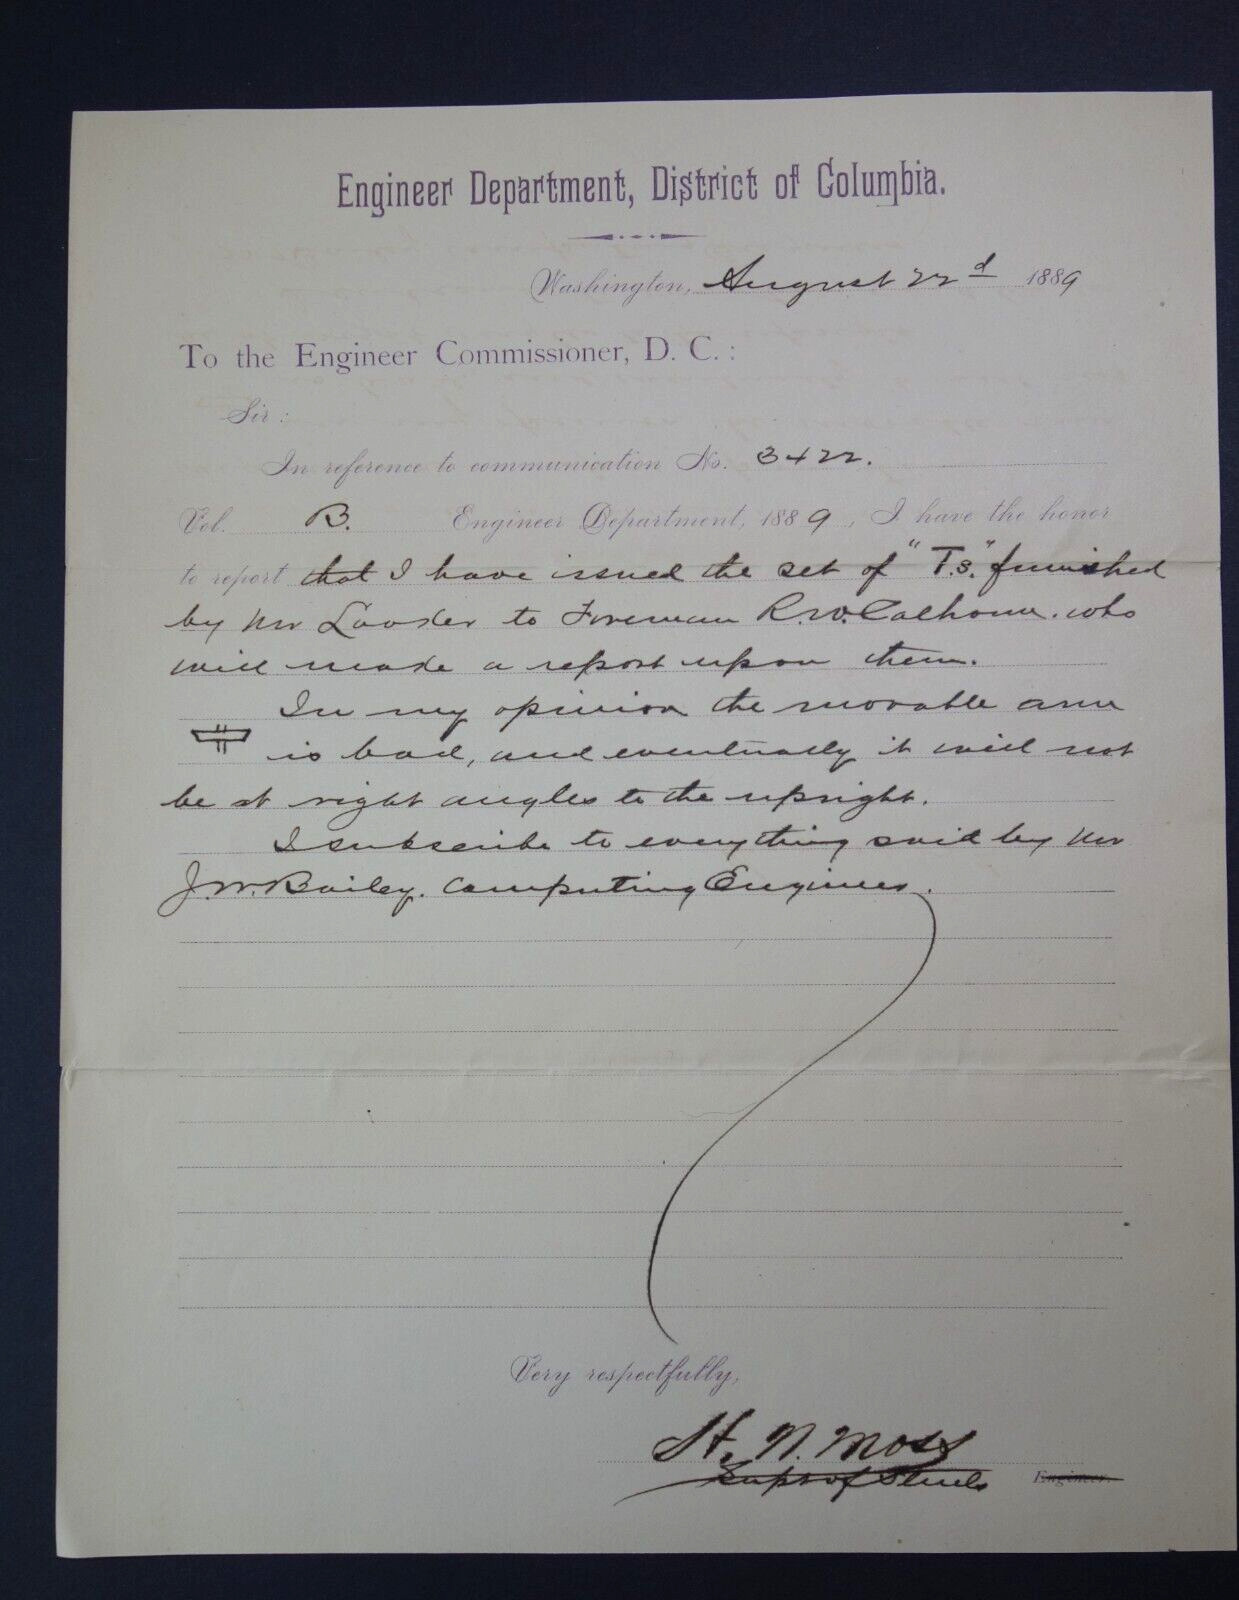 Engineer Department, District of Columbia 1889 letterhead document